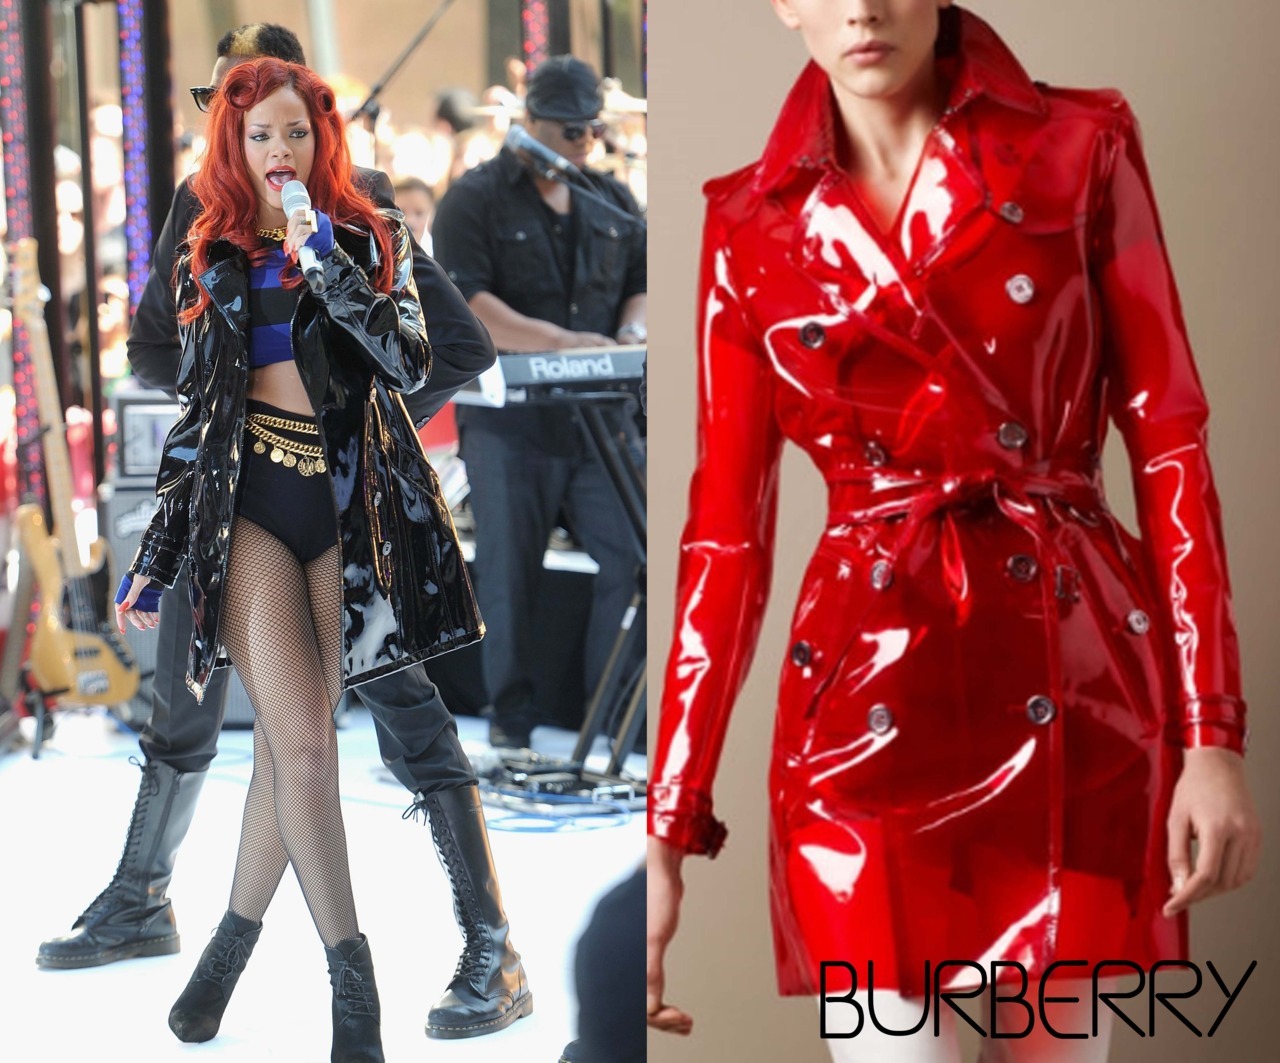 Rihanna also in a Burberry pvc trenchcoat and in a pair of Manolo Blahnik lace suede boots.